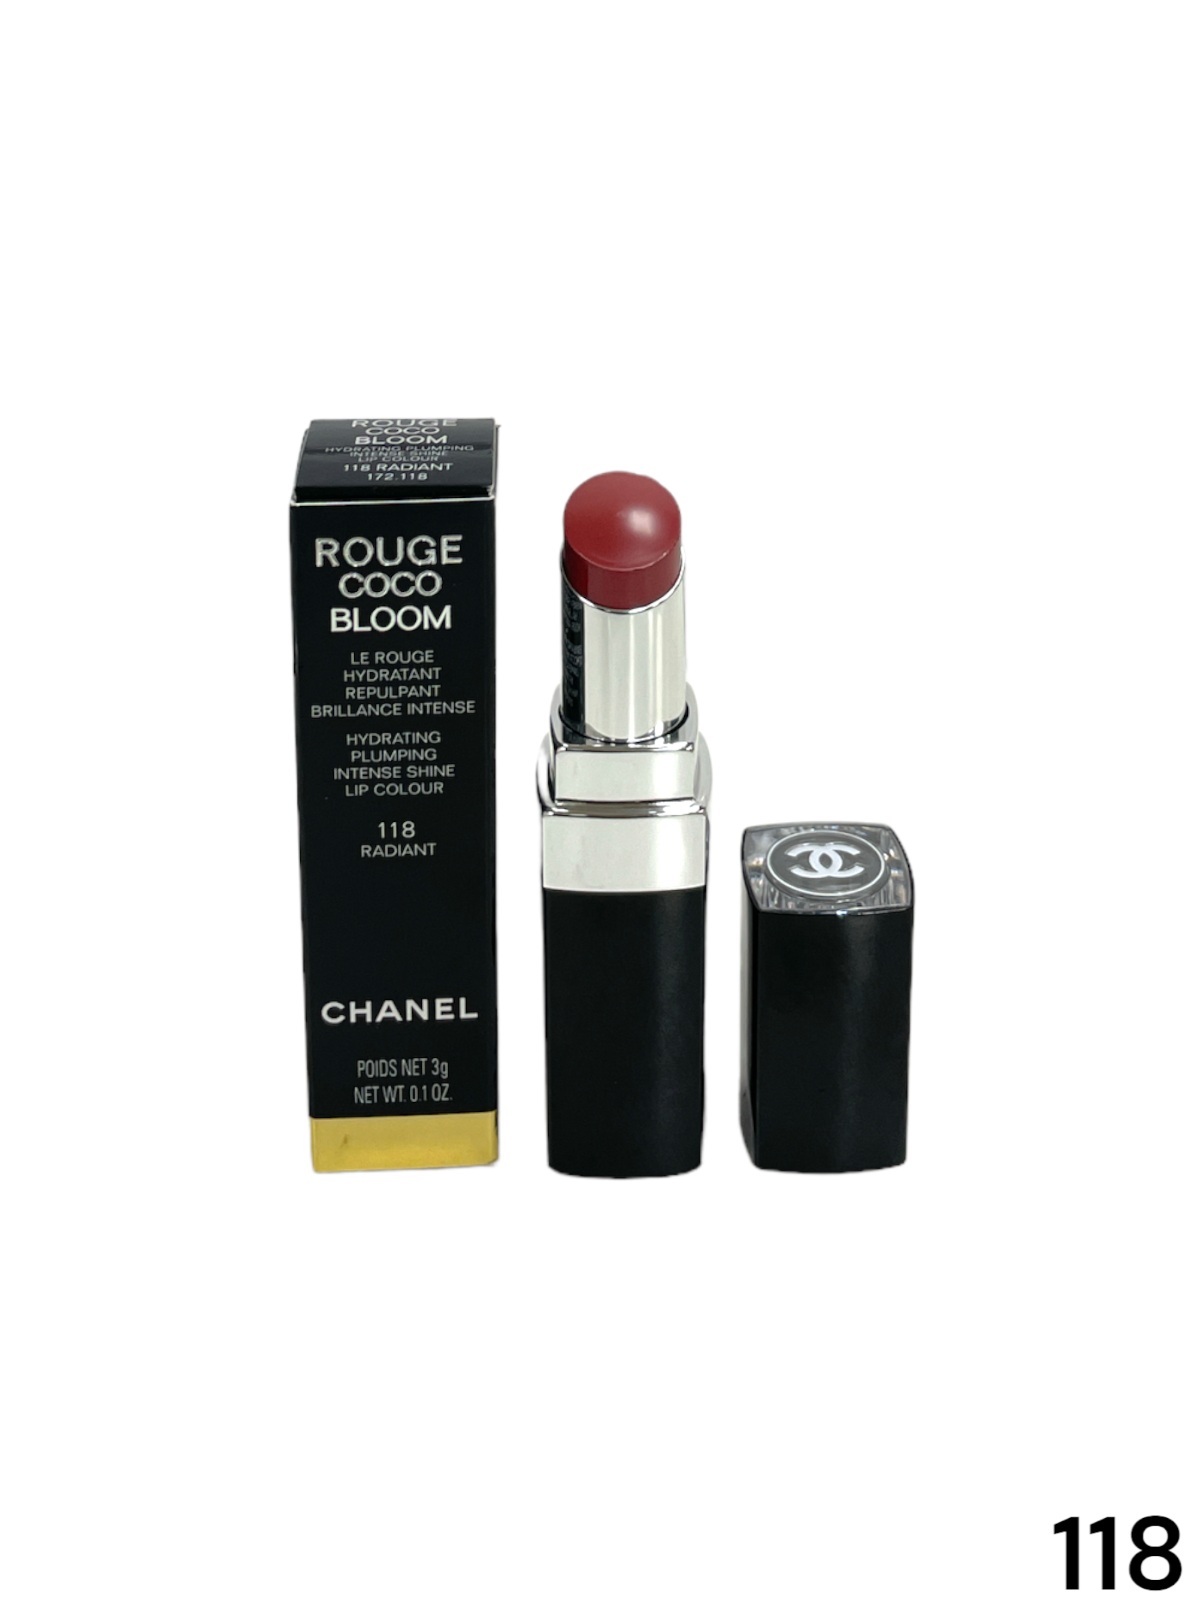 CHANEL+-+ROUGE+COCO+BLOOM+-PLUMPING+INTENSE+SHINE+LIP+COLOUR+-120+FRESHNESS+-NEW  for sale online